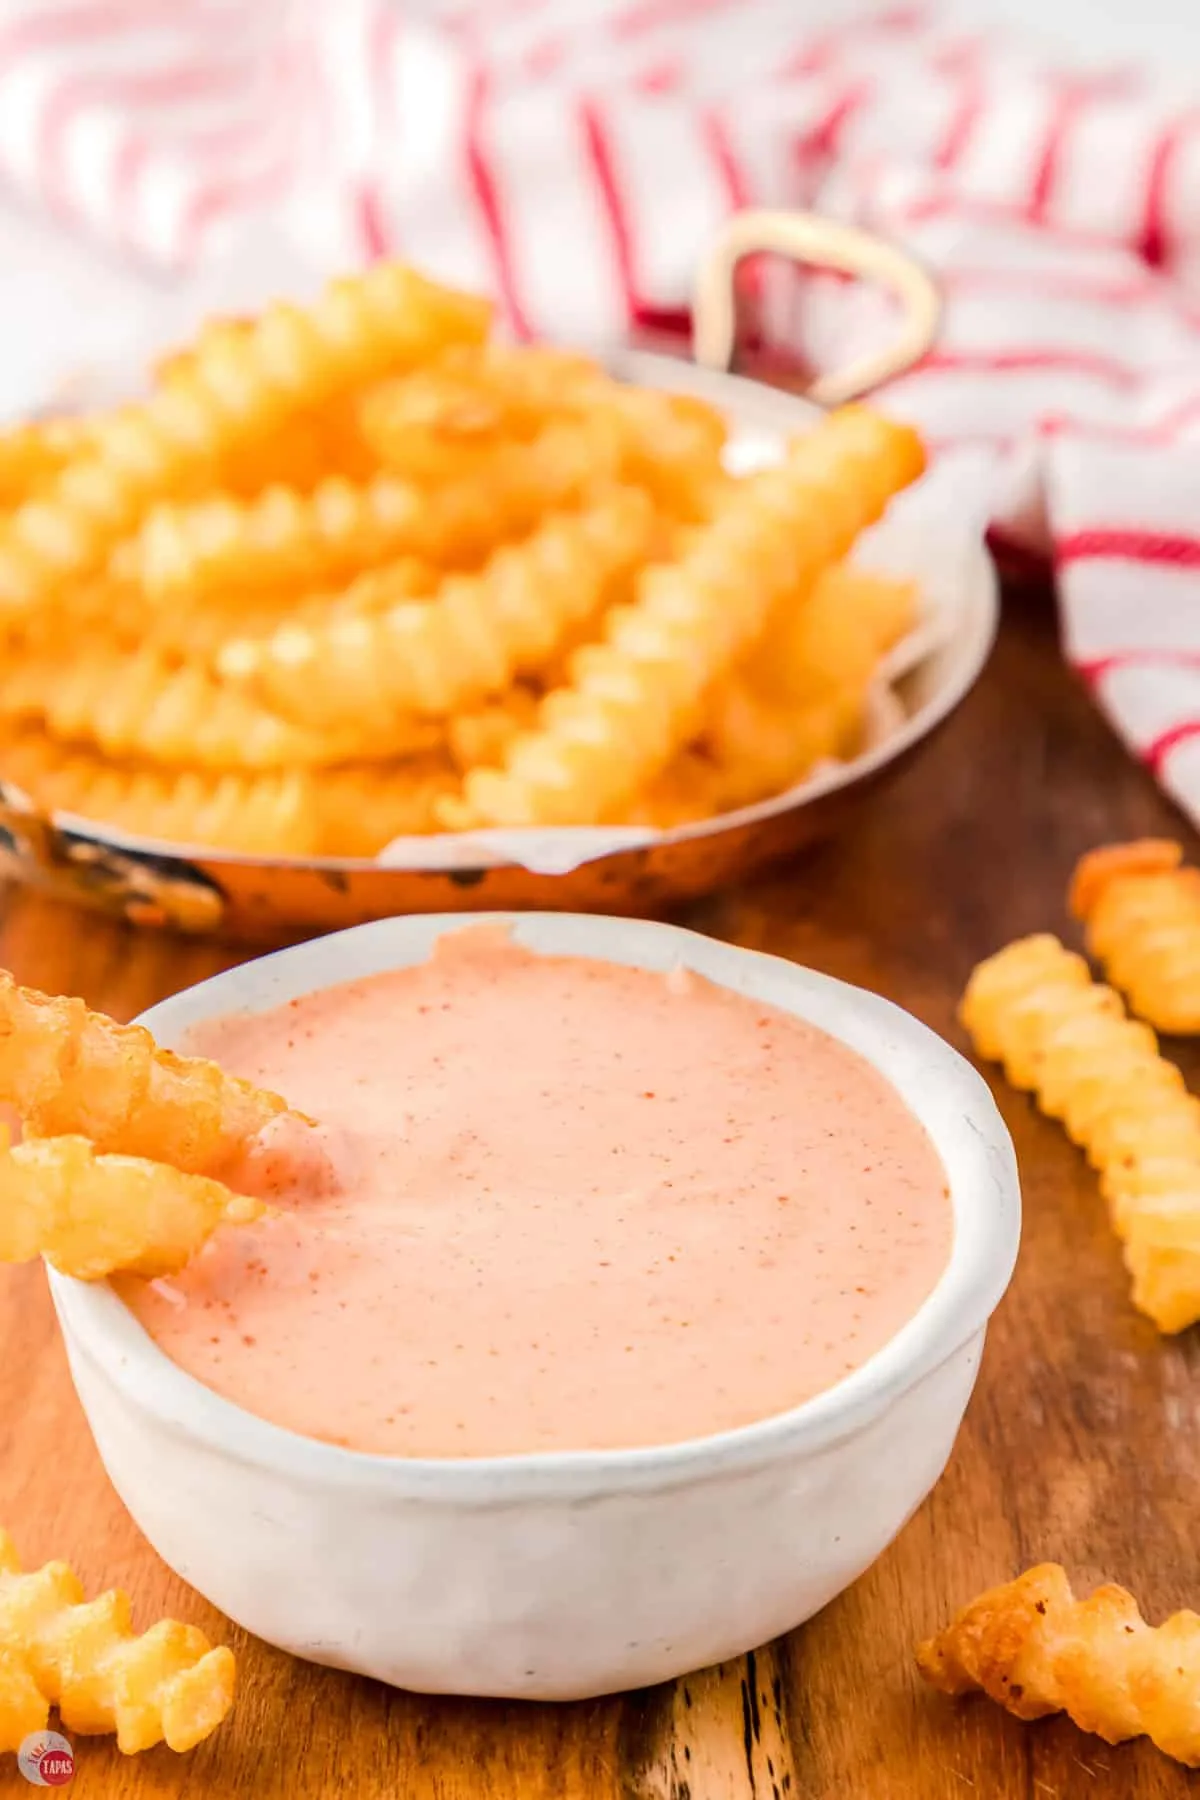 bowl of sauce and plate of fries